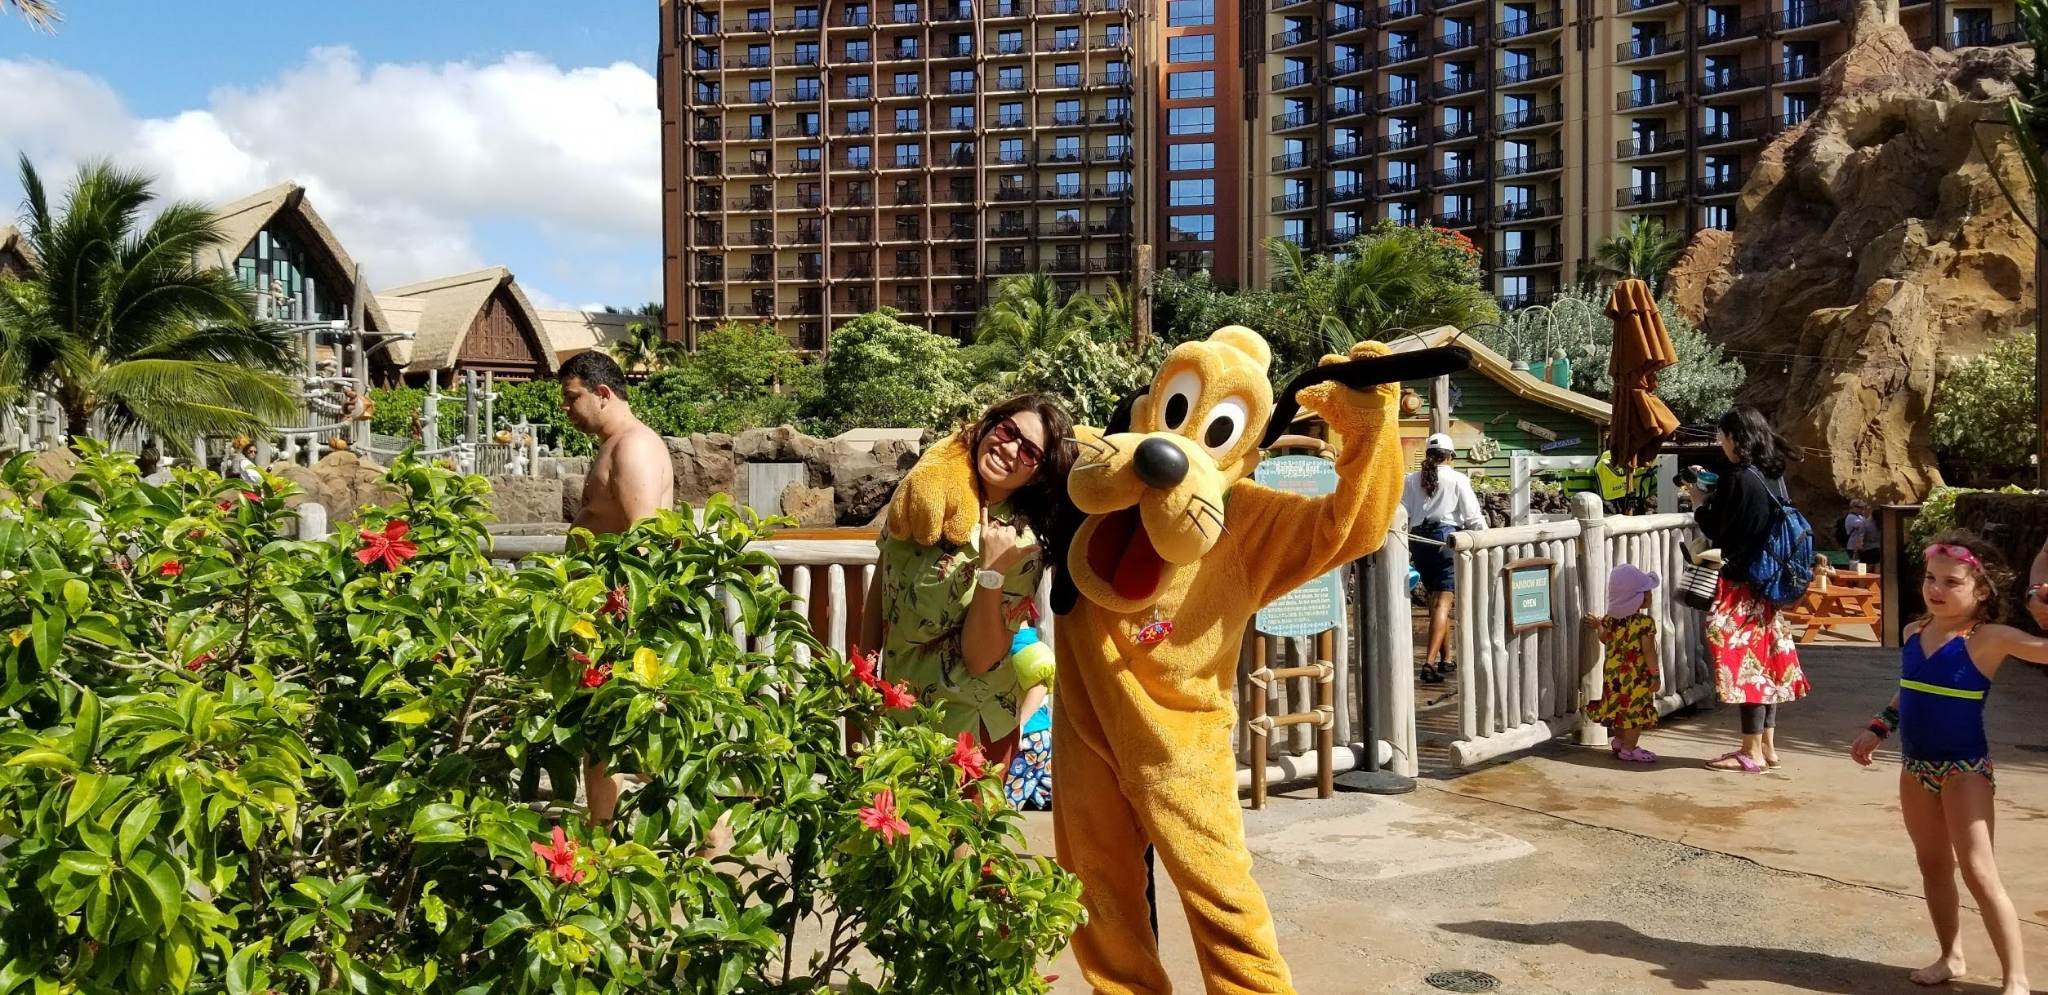 Save up to 30% on Stays at Disney’s Aulani Resort